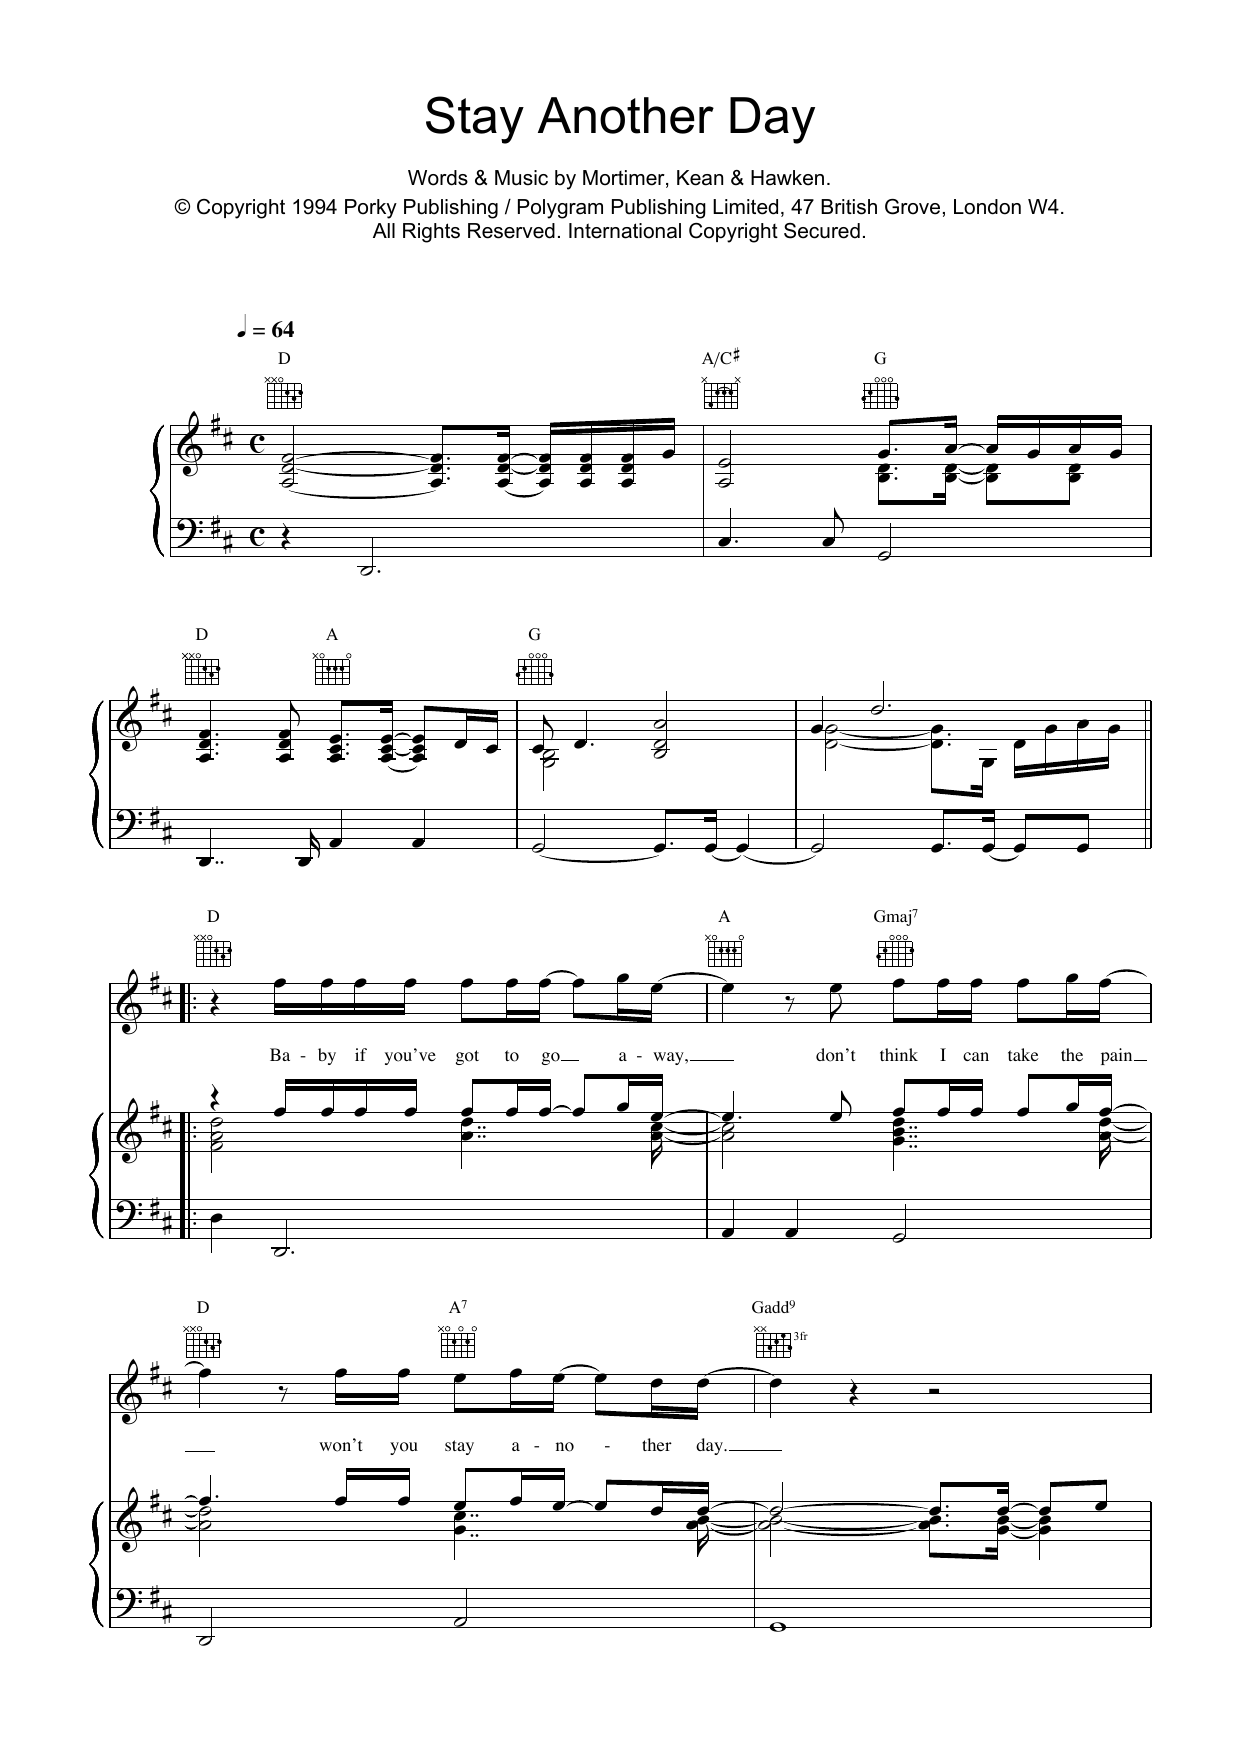 East 17 Stay Another Day sheet music notes and chords. Download Printable PDF.